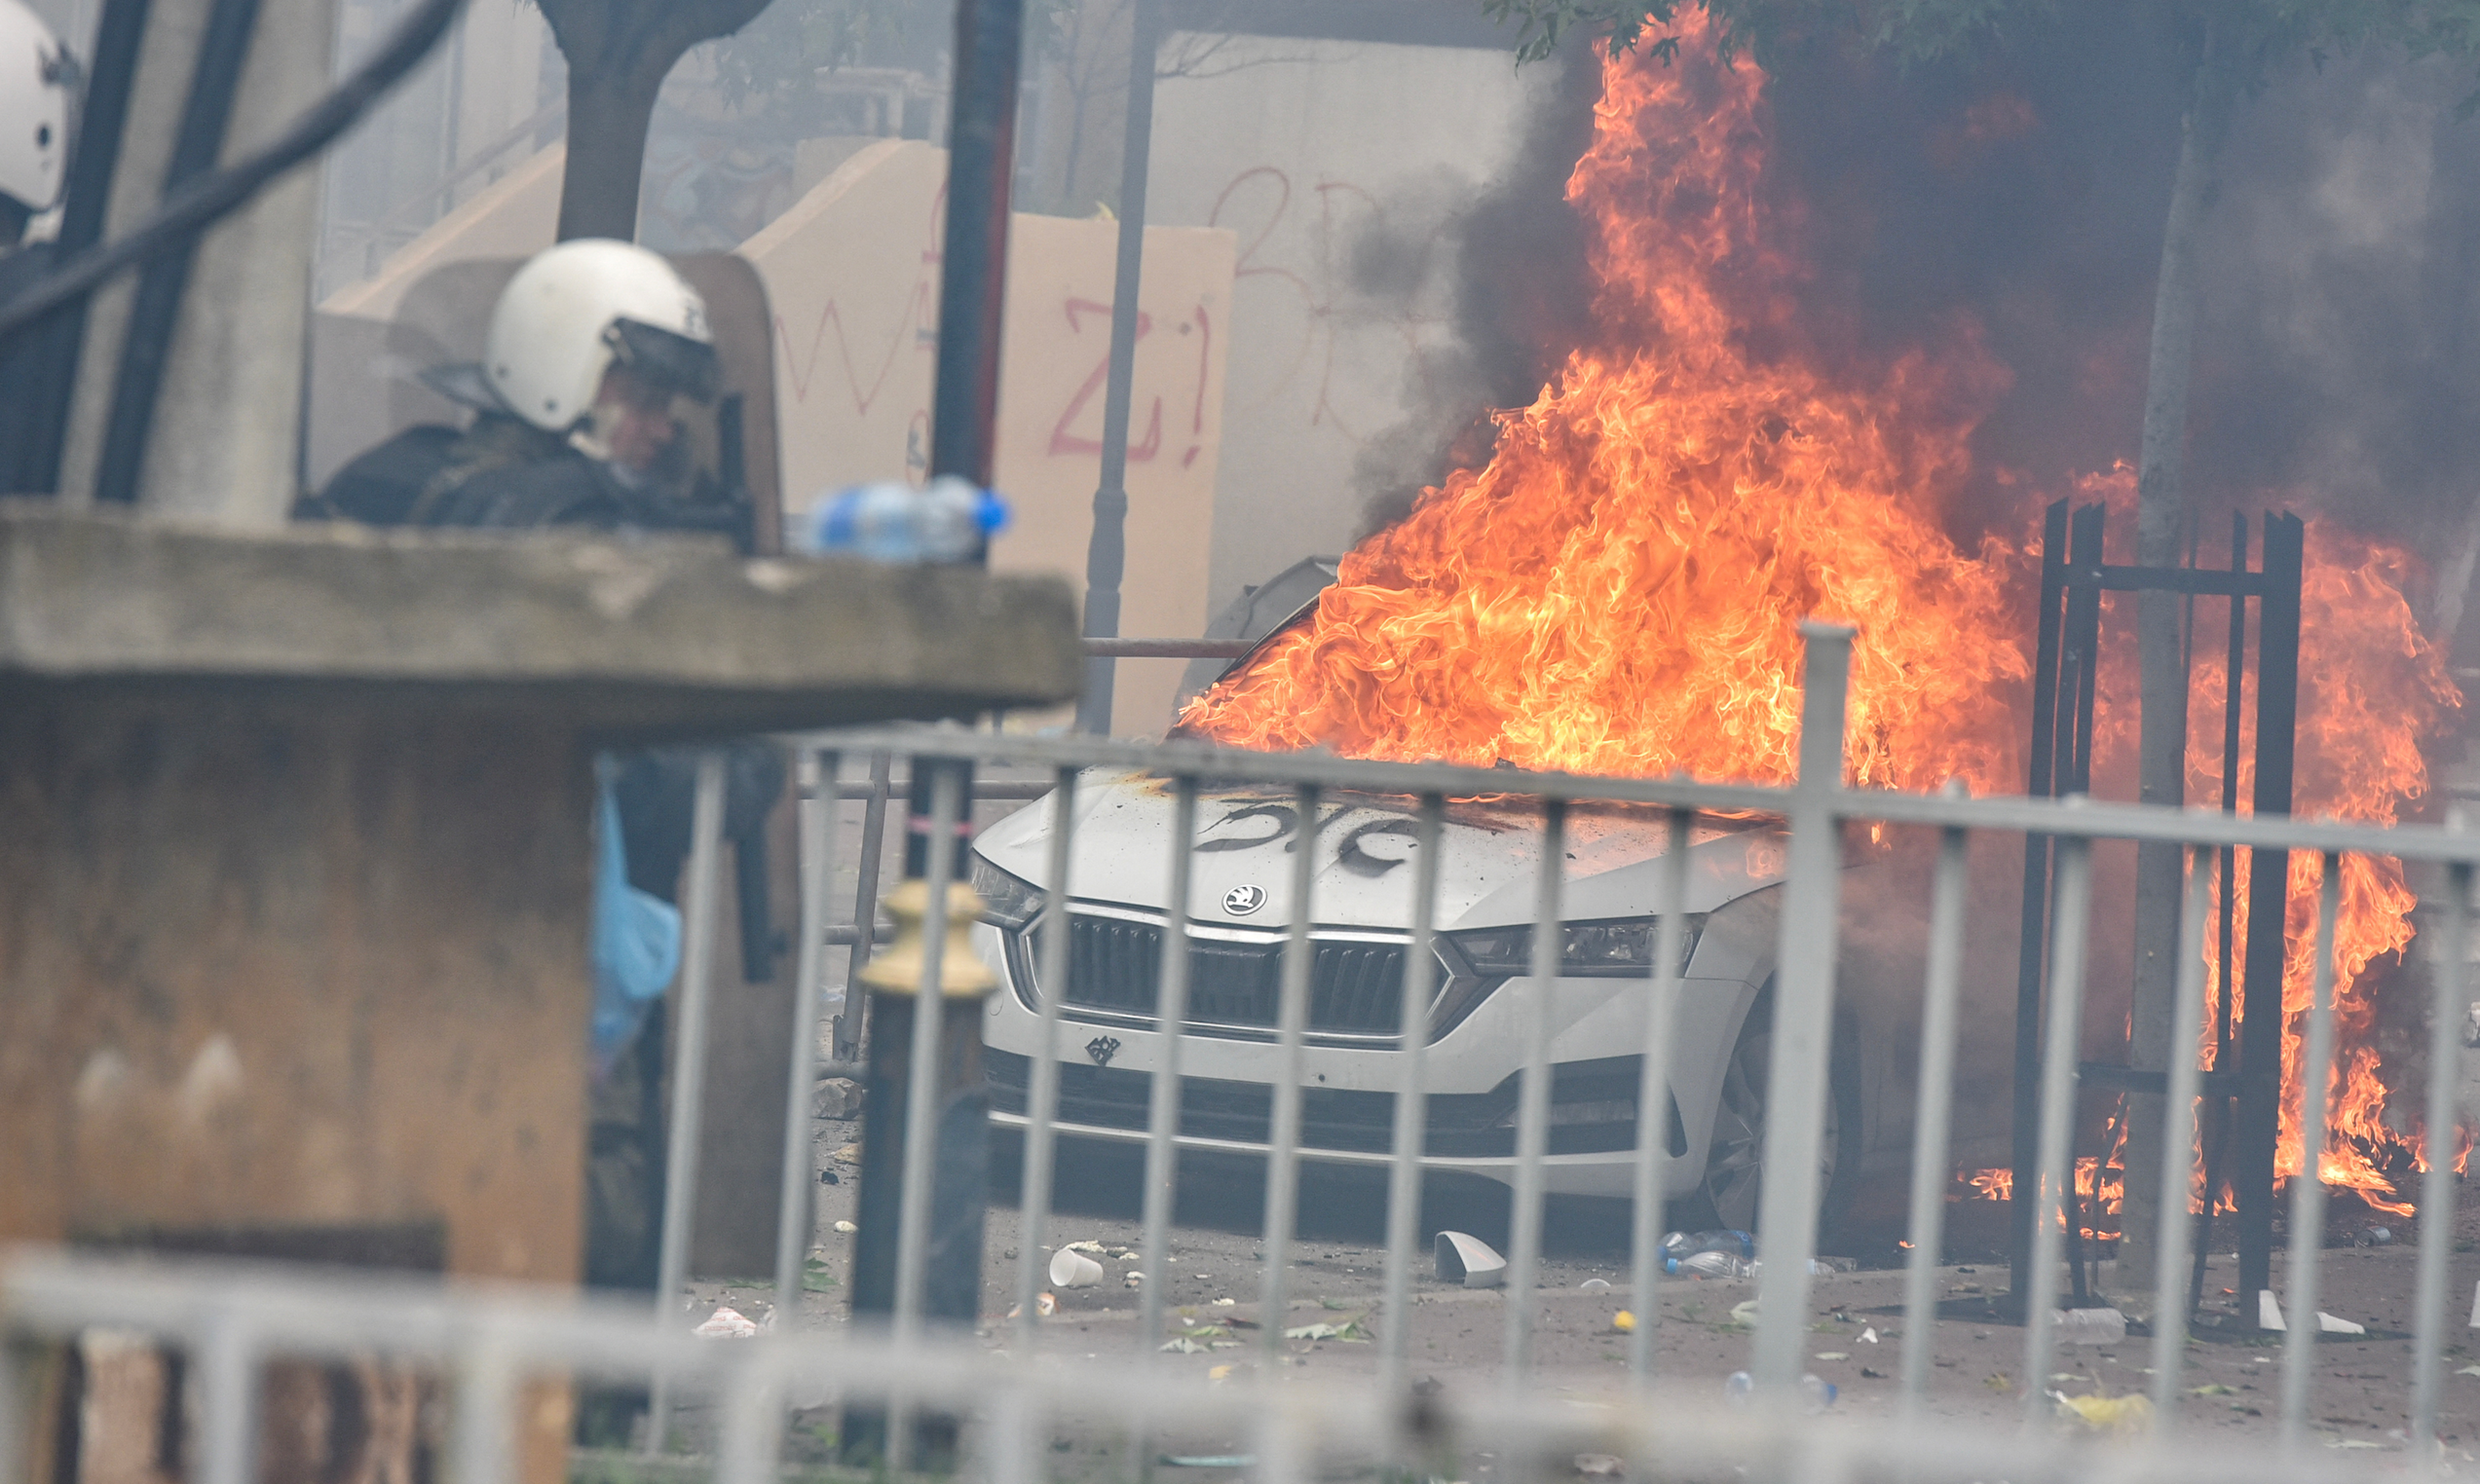 A car burns after NATO Kosovo Force (KFOR) soldiers clashed with local Kosovo Serb protesters at the entrance of the municipality office.